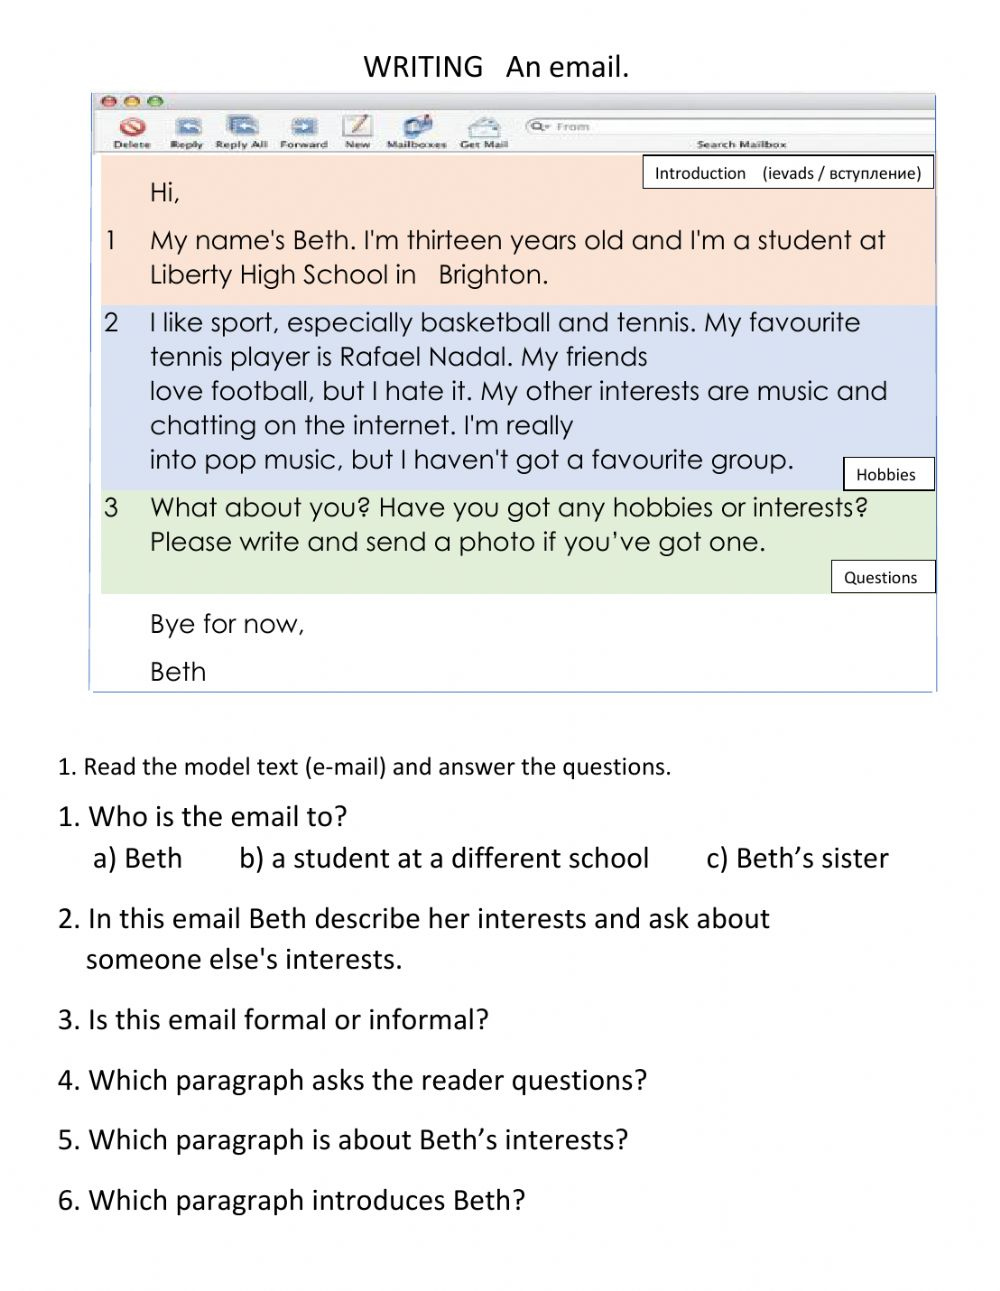 Writing An Email Exercise For Elementary